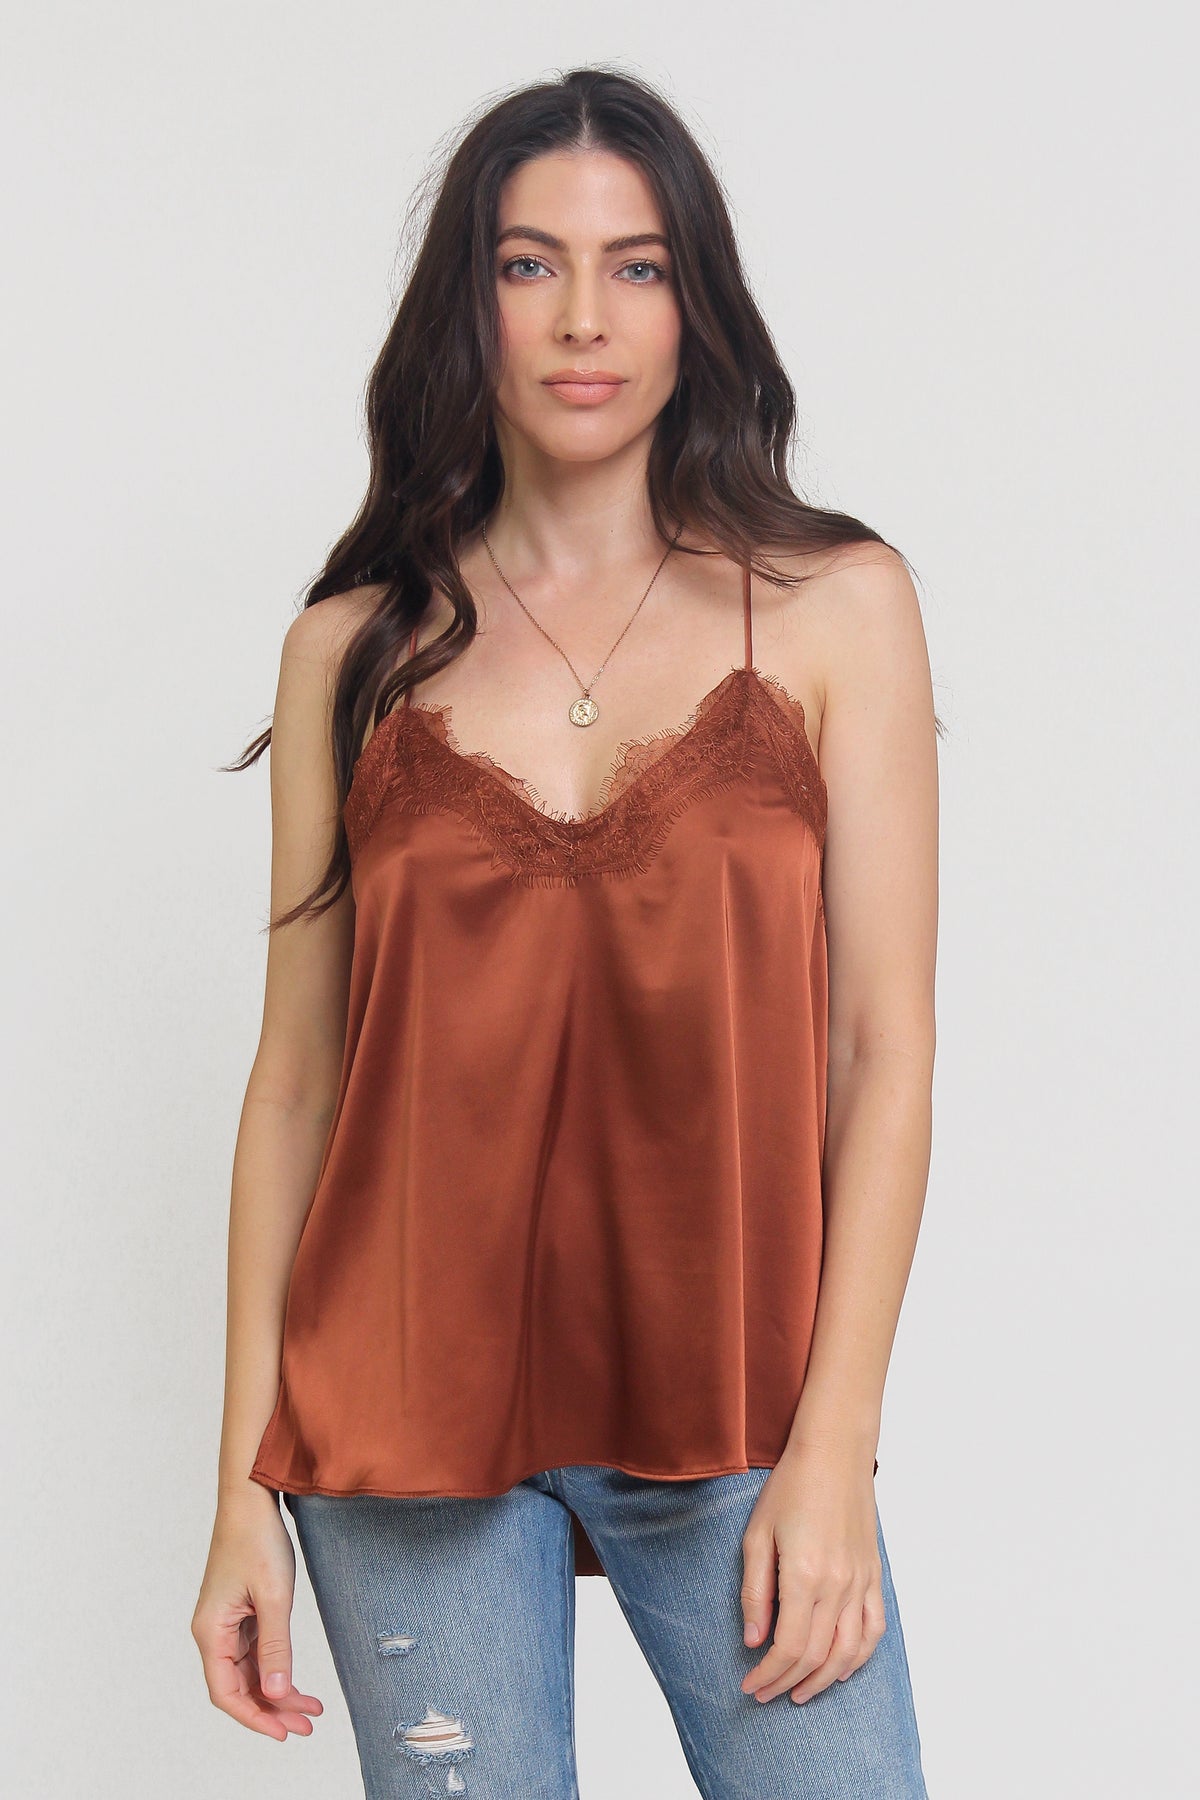 Bret Satin Cross Tie Cami Top - Taupe – Girls Will Be Girls